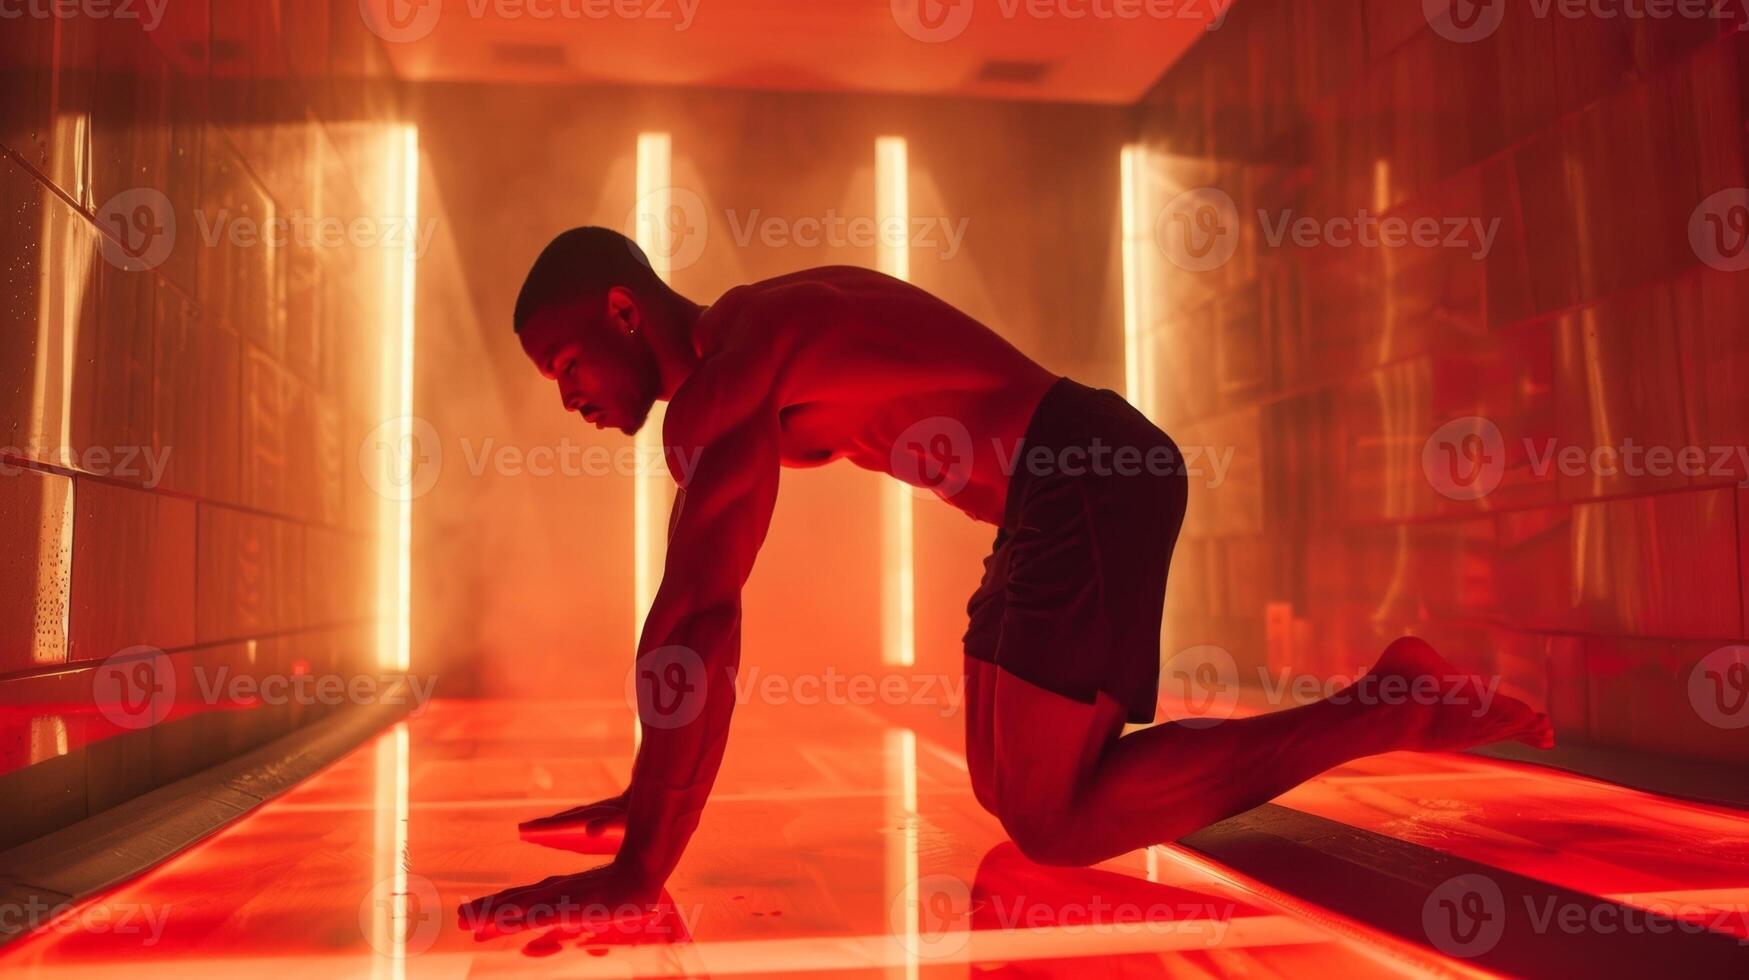 A yogi holds a side plank pose inside the infrared sauna their muscles working harder in the heat as they focus on building strength and endurance. photo